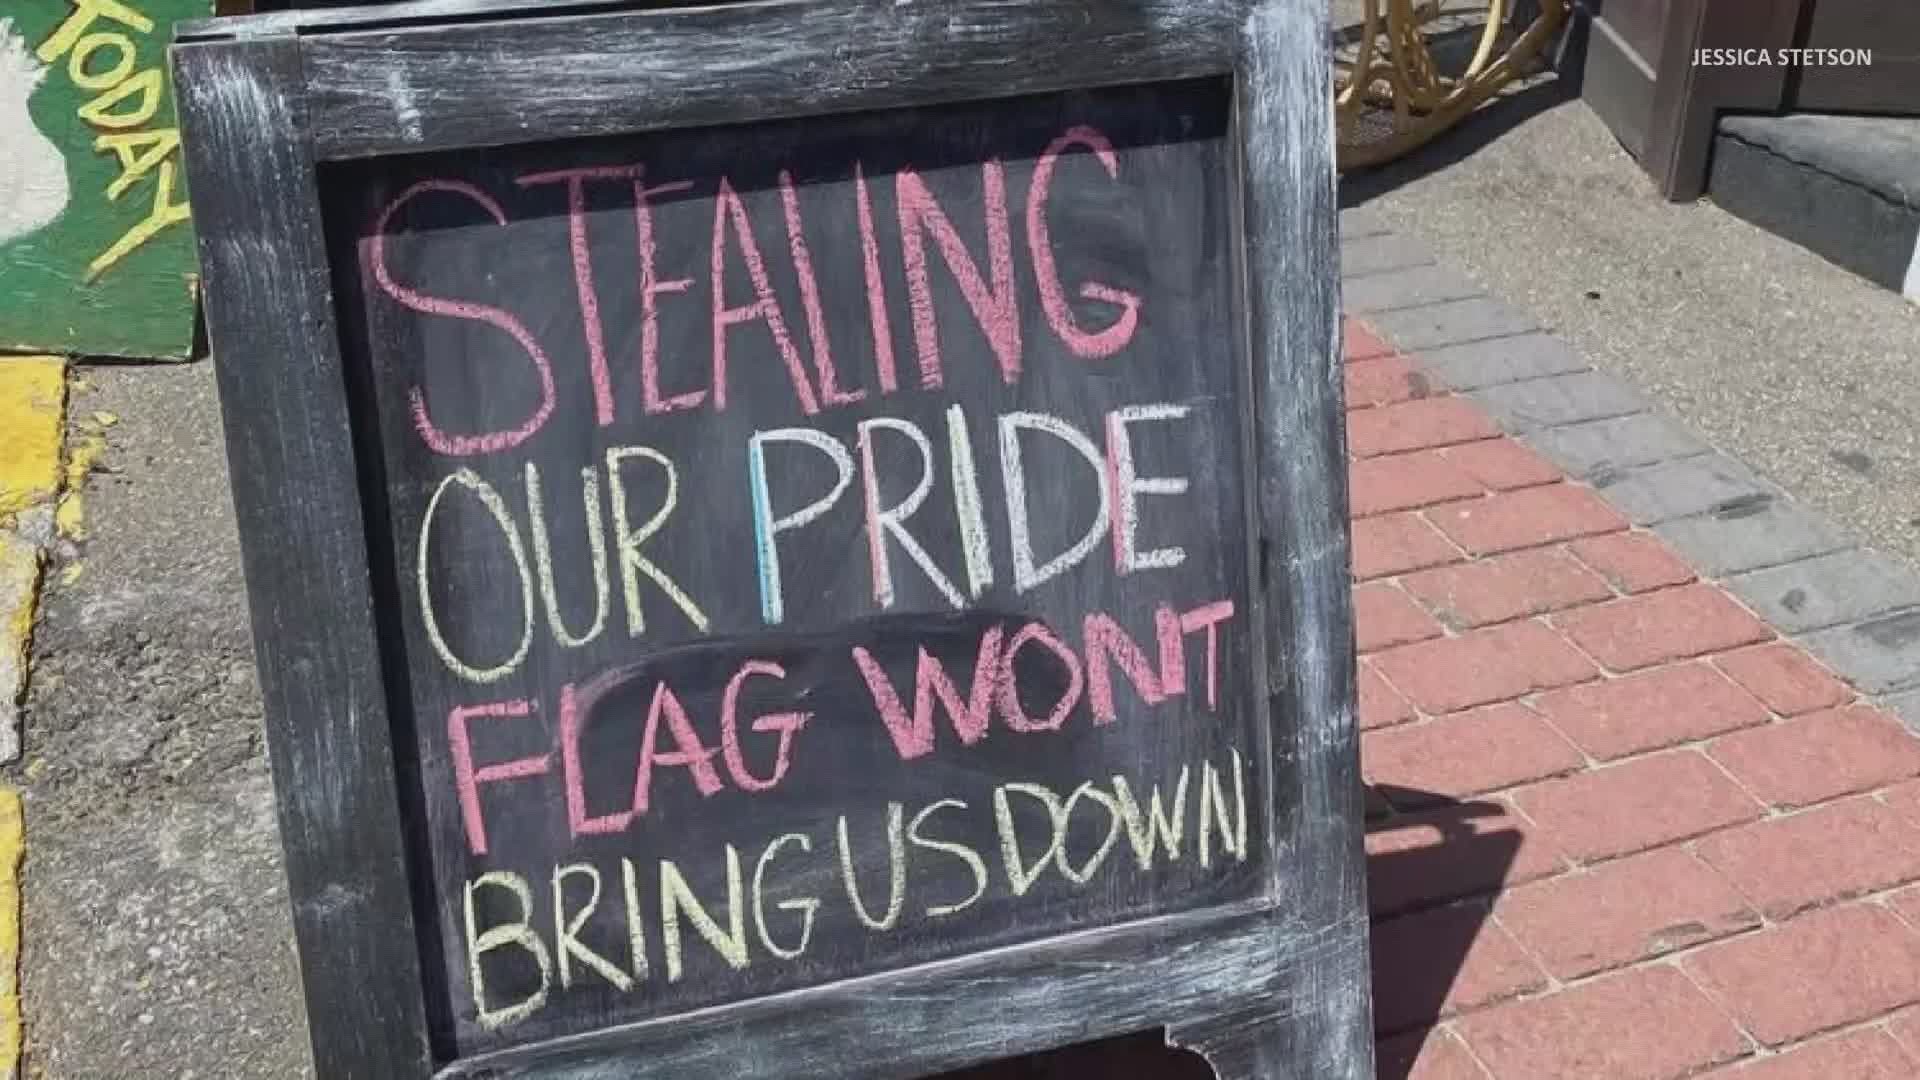 Days after the pride flag at the Old Soul Collective shop in Skowhegan was torn down and stolen, several new flags were donated in a show of support.